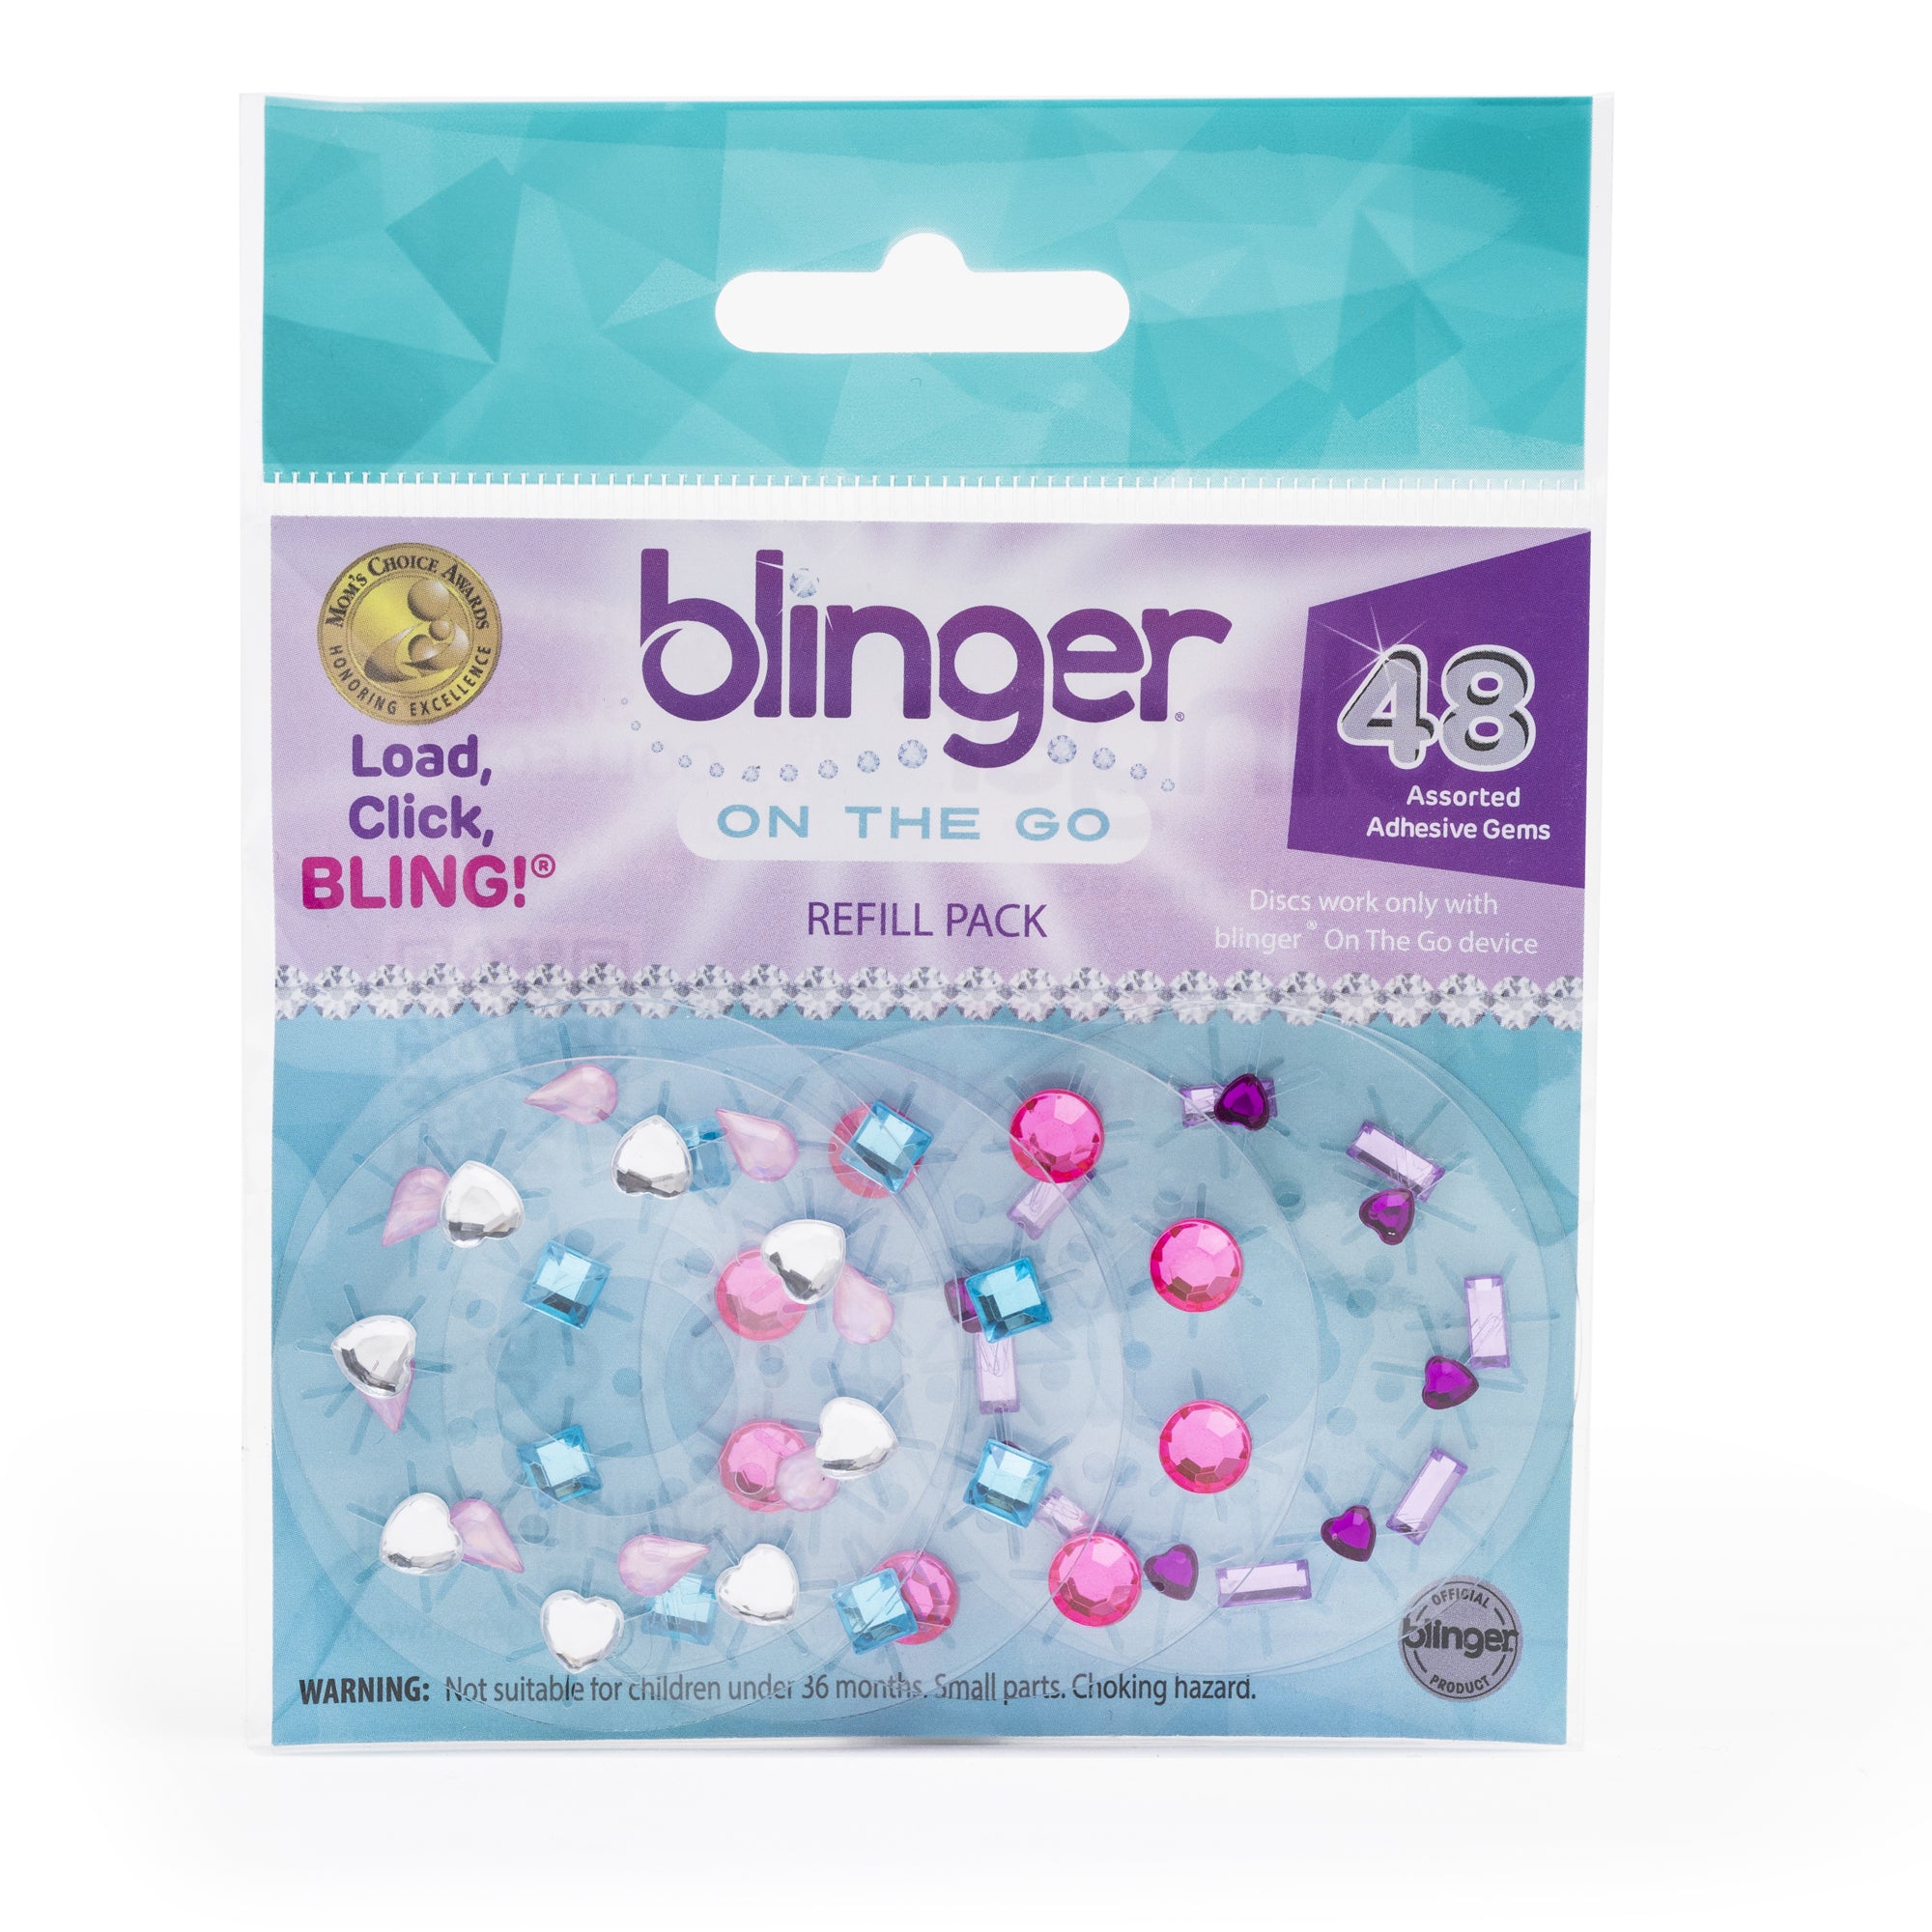 blinger® On The Go (Mini) Refill Pack with 48 Colorful Acrylic Rhinestones